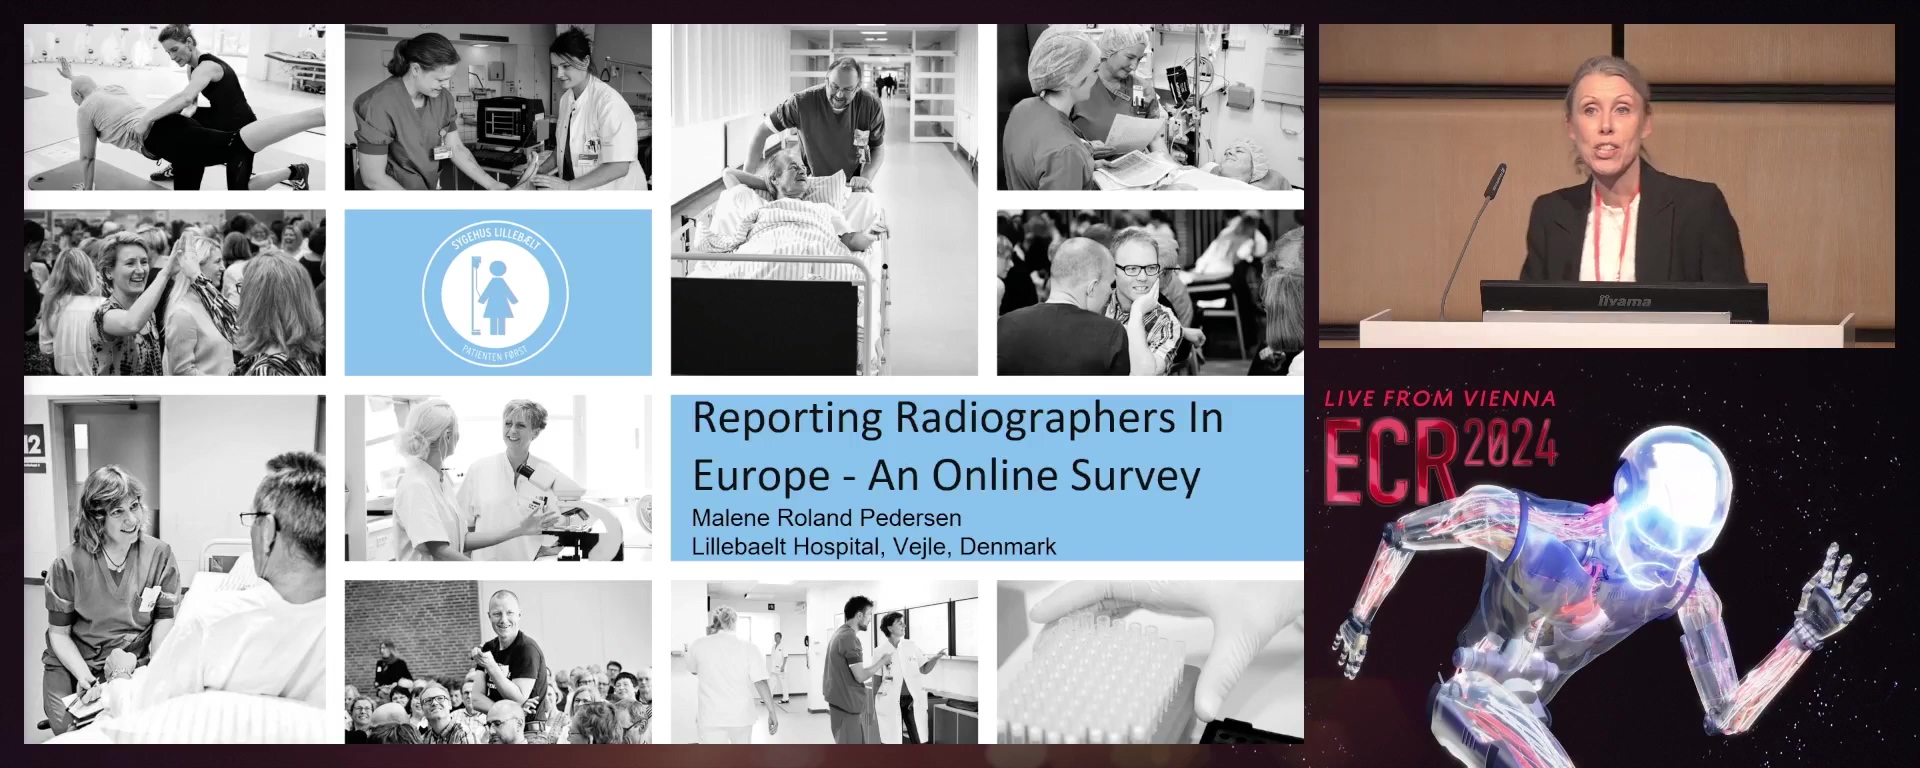 Reporting radiographers in Europe: an online survey